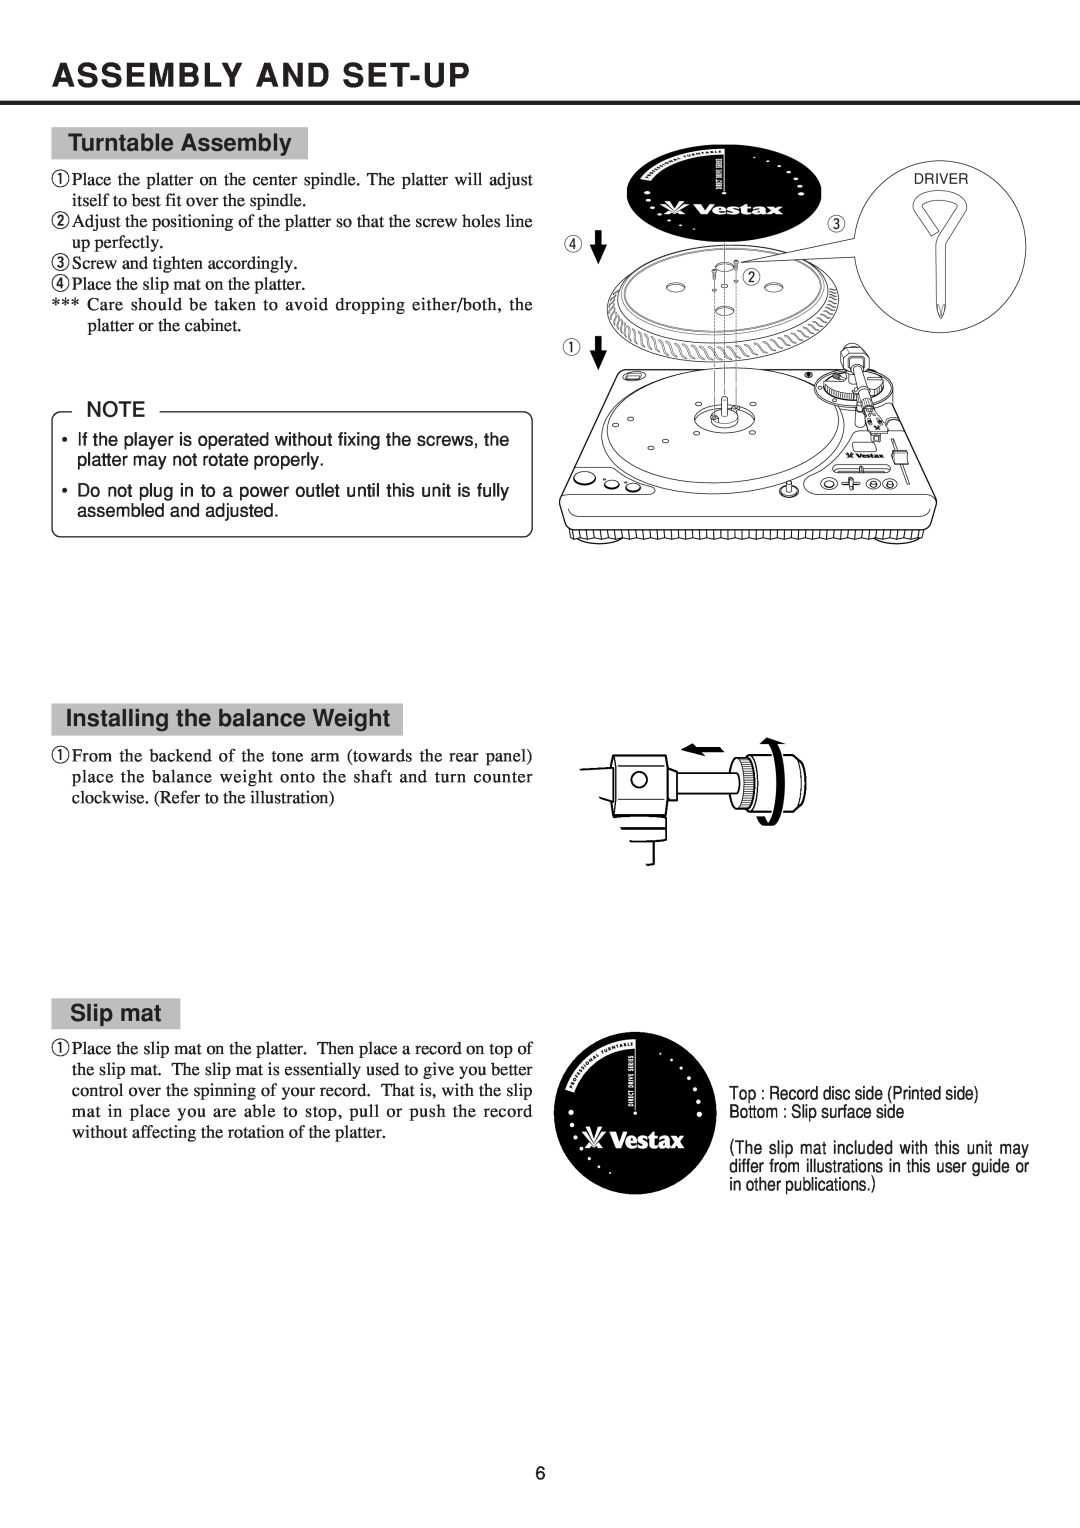 Vestax PDX-2300 owner manual Assembly And Set-Up, Turntable Assembly, Installing the balance Weight, Slip mat 